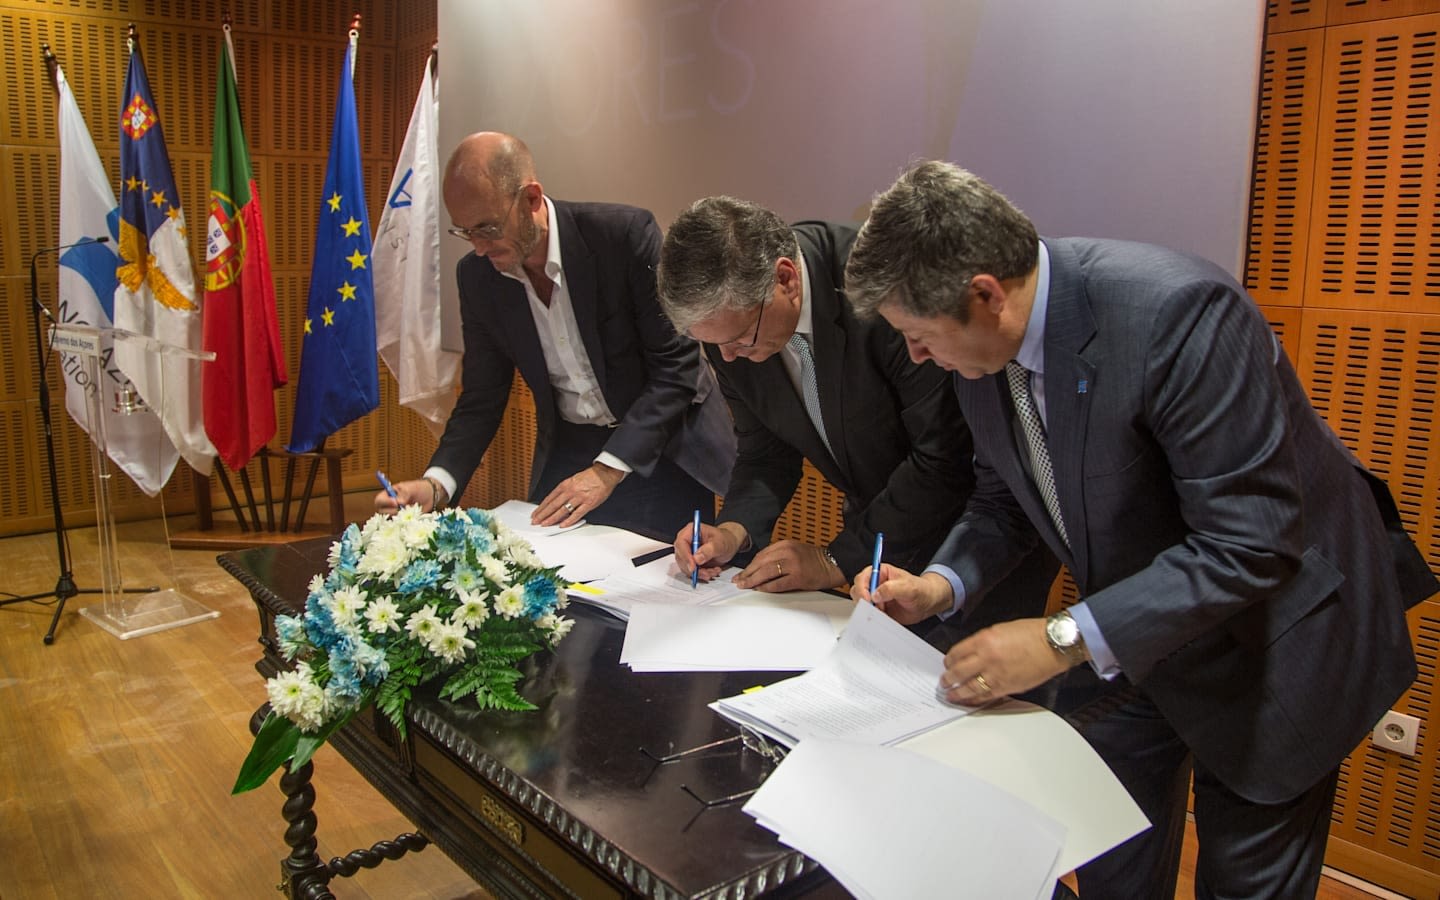 3 politictians stood over a a desk signing papers flags in the back ground and boquet of white and blue flowers on the desk